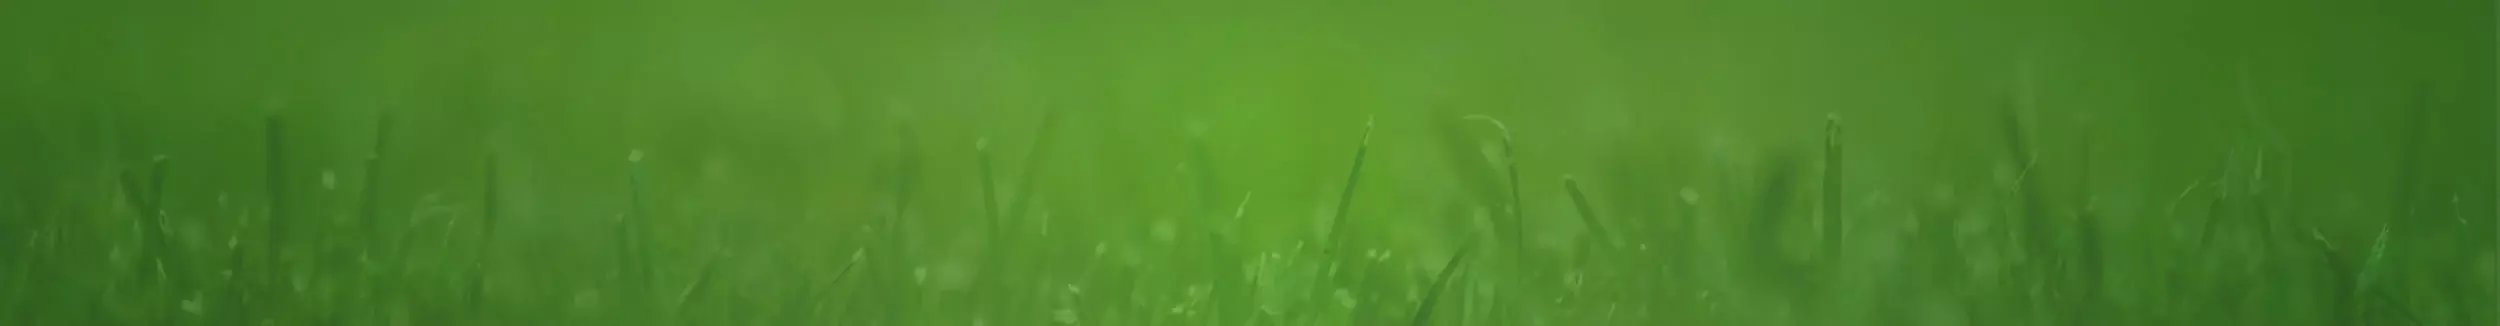 blog banner grass with green background